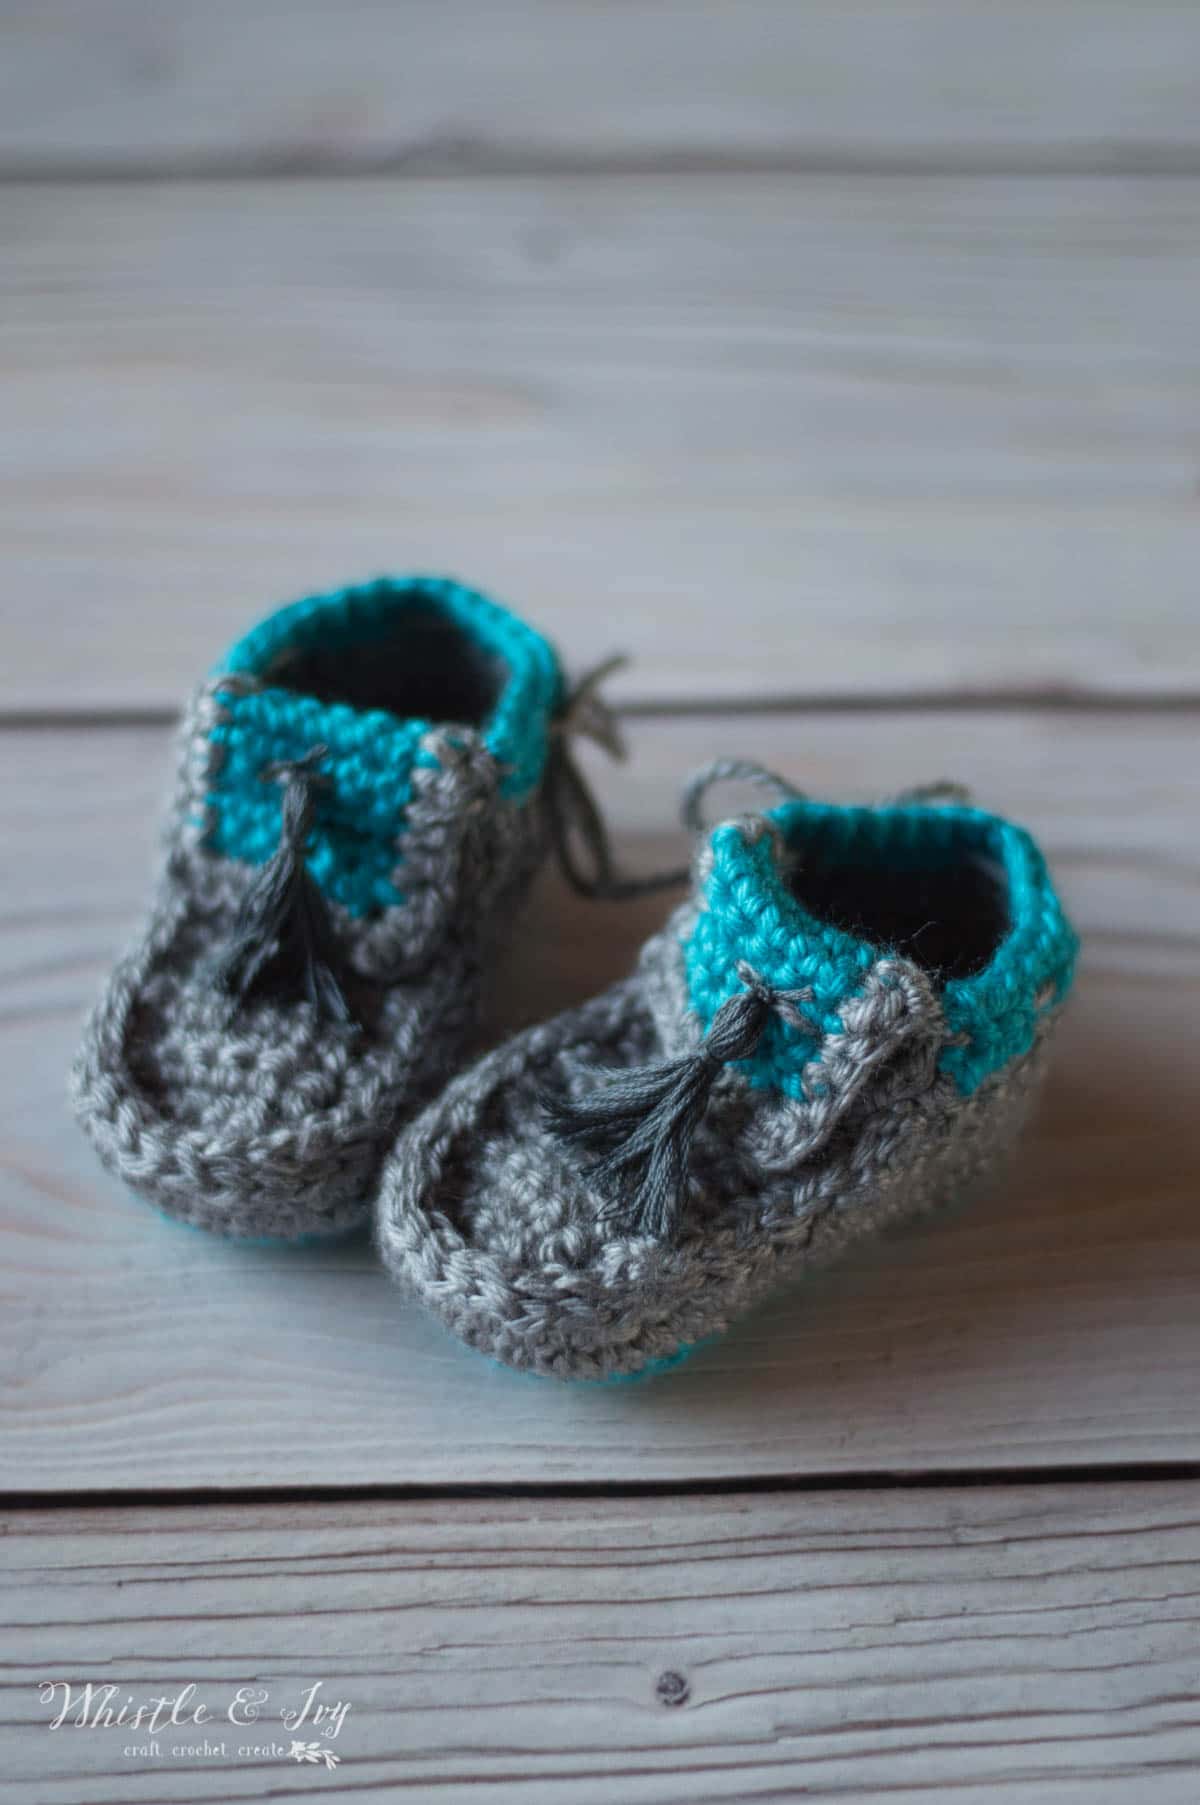 Delightful Crochet Baby Moccasins you can make to keep baby’s feet cozy this fall – Free Crochet Pattern